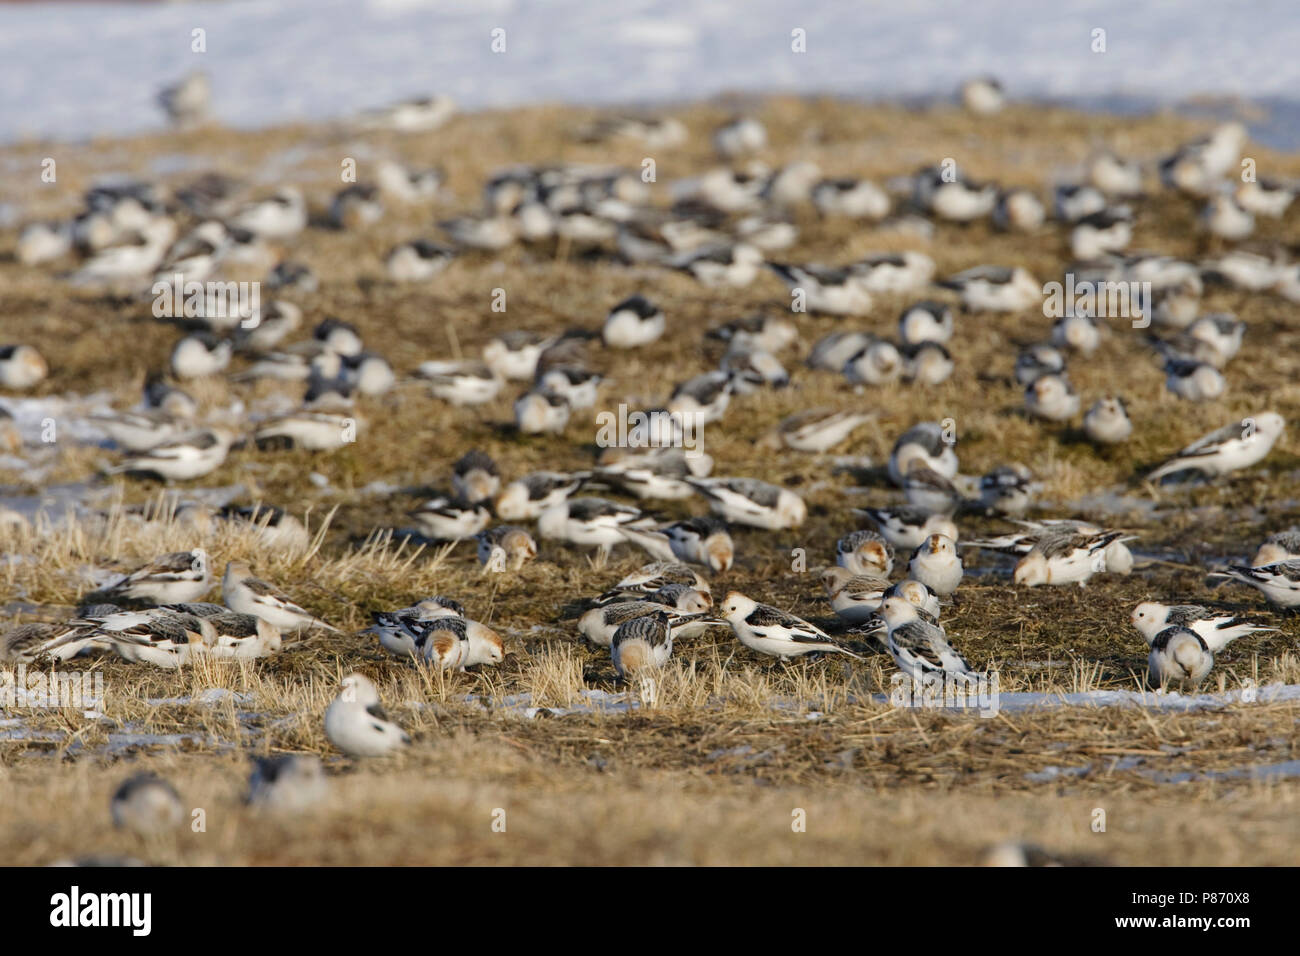 Large group on a meadow; Grote groep op weiland Stock Photo